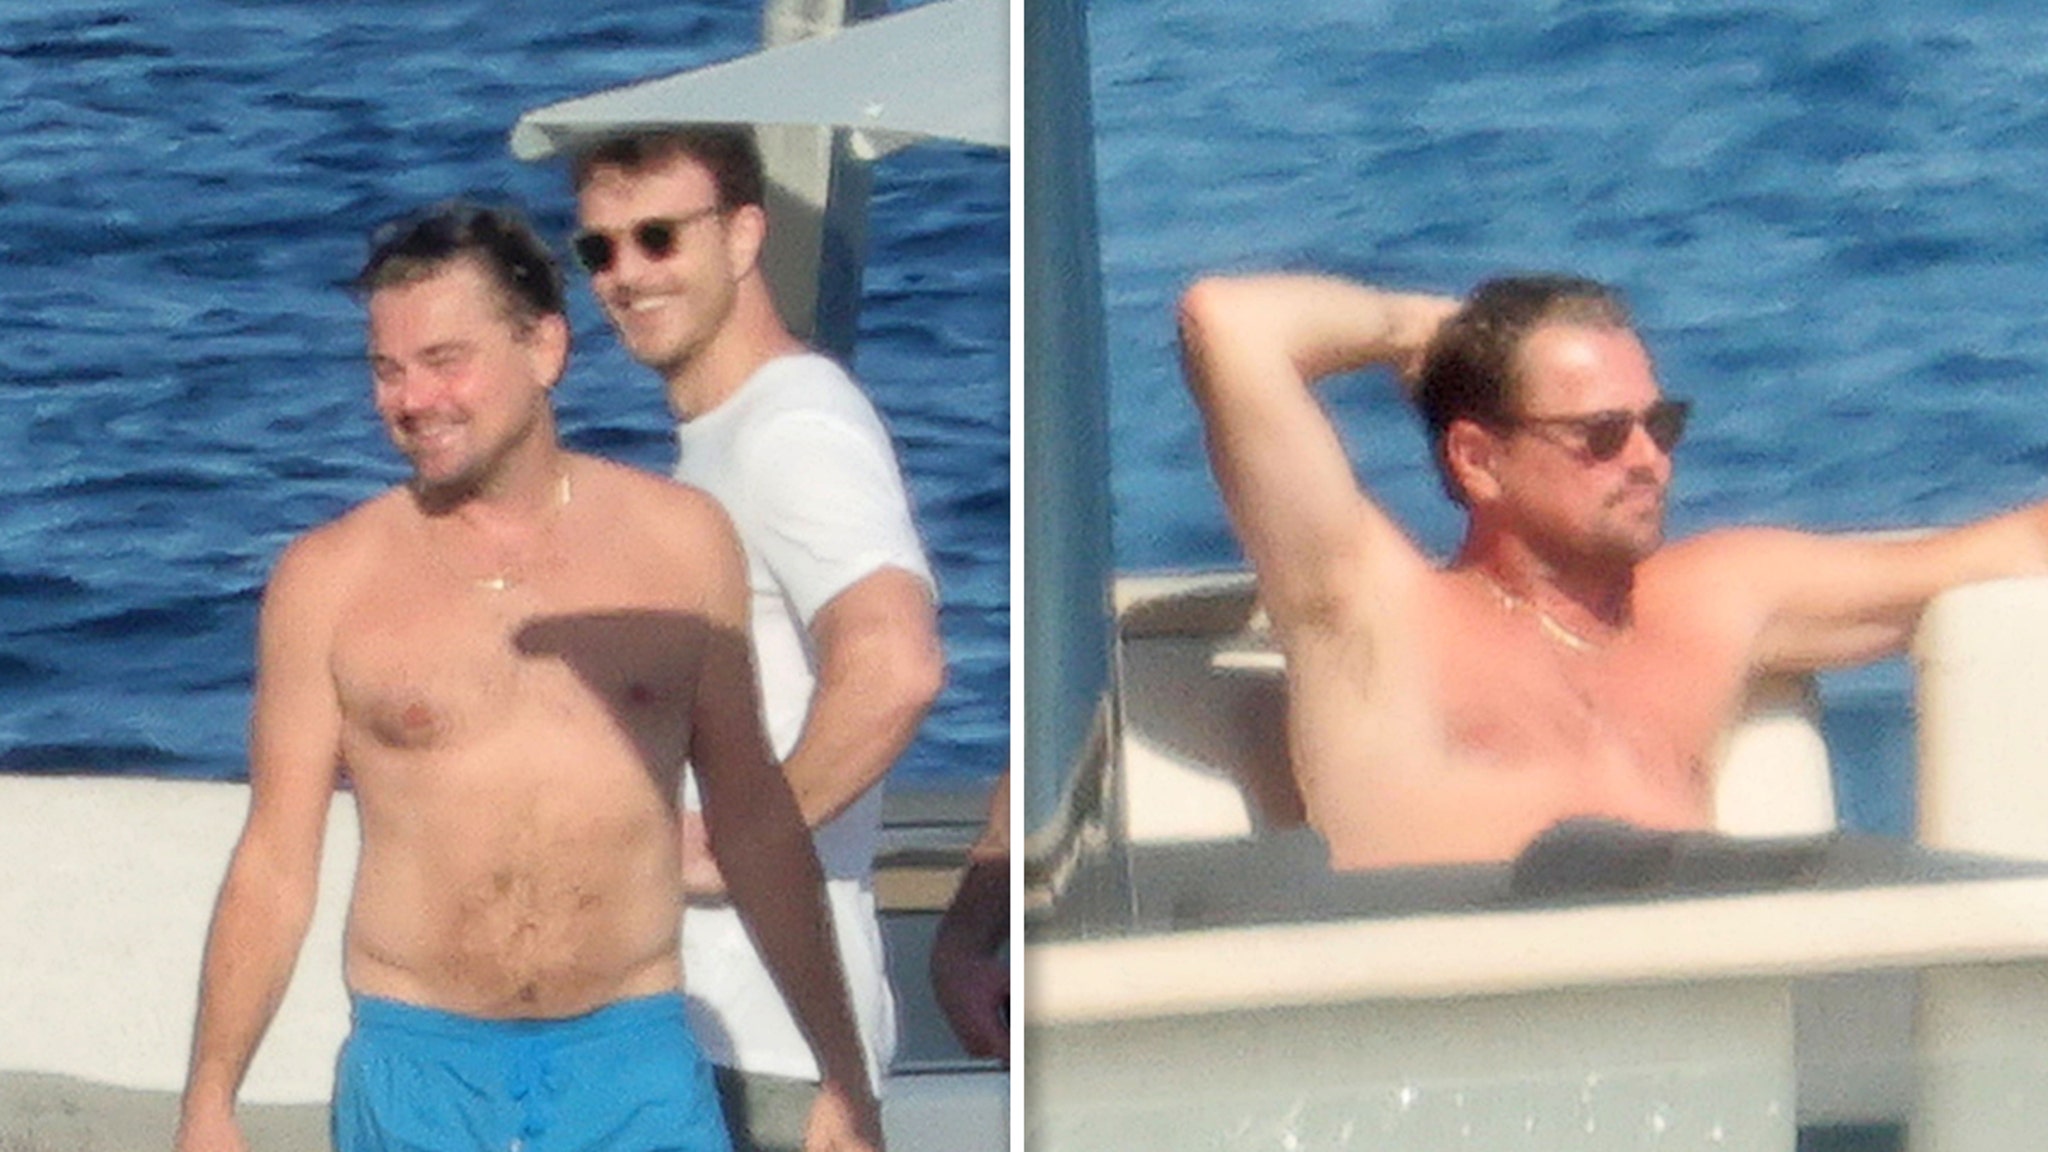 Leonardo DiCaprio hangs out with friends on yacht in Sardinia